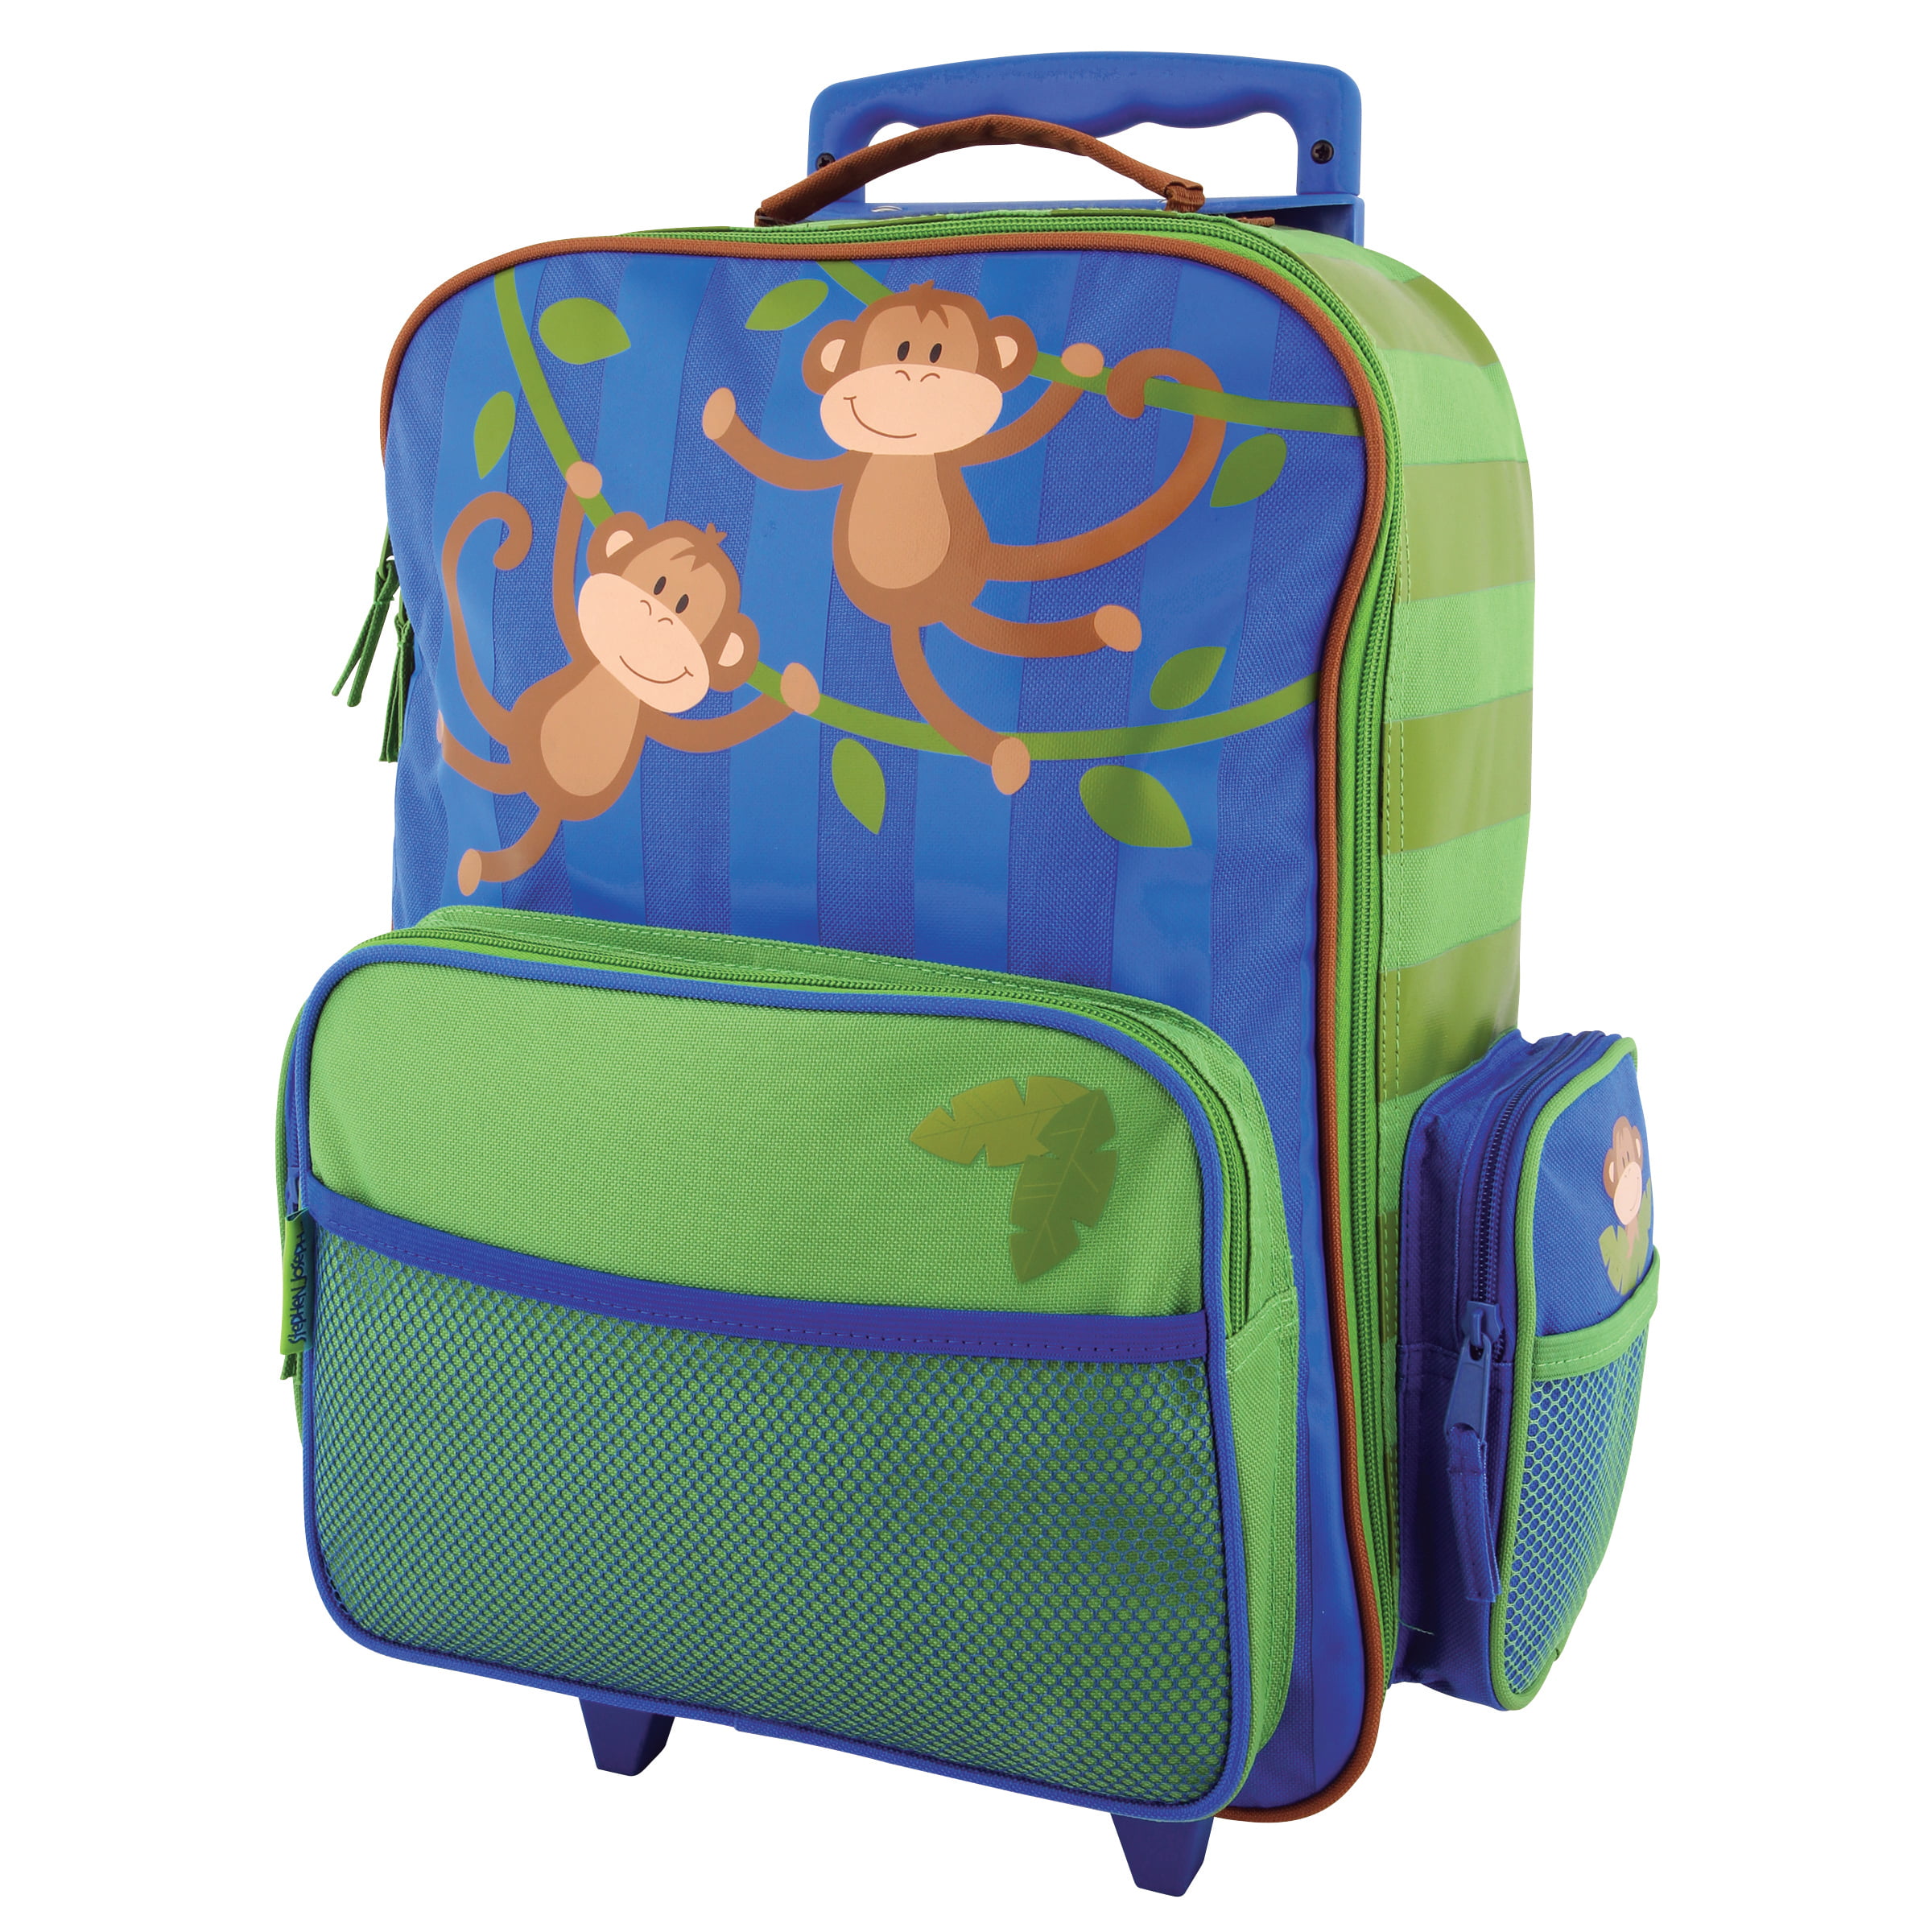 Stephen Joseph - Classic Rolling Kids Carry-on Luggage - 0